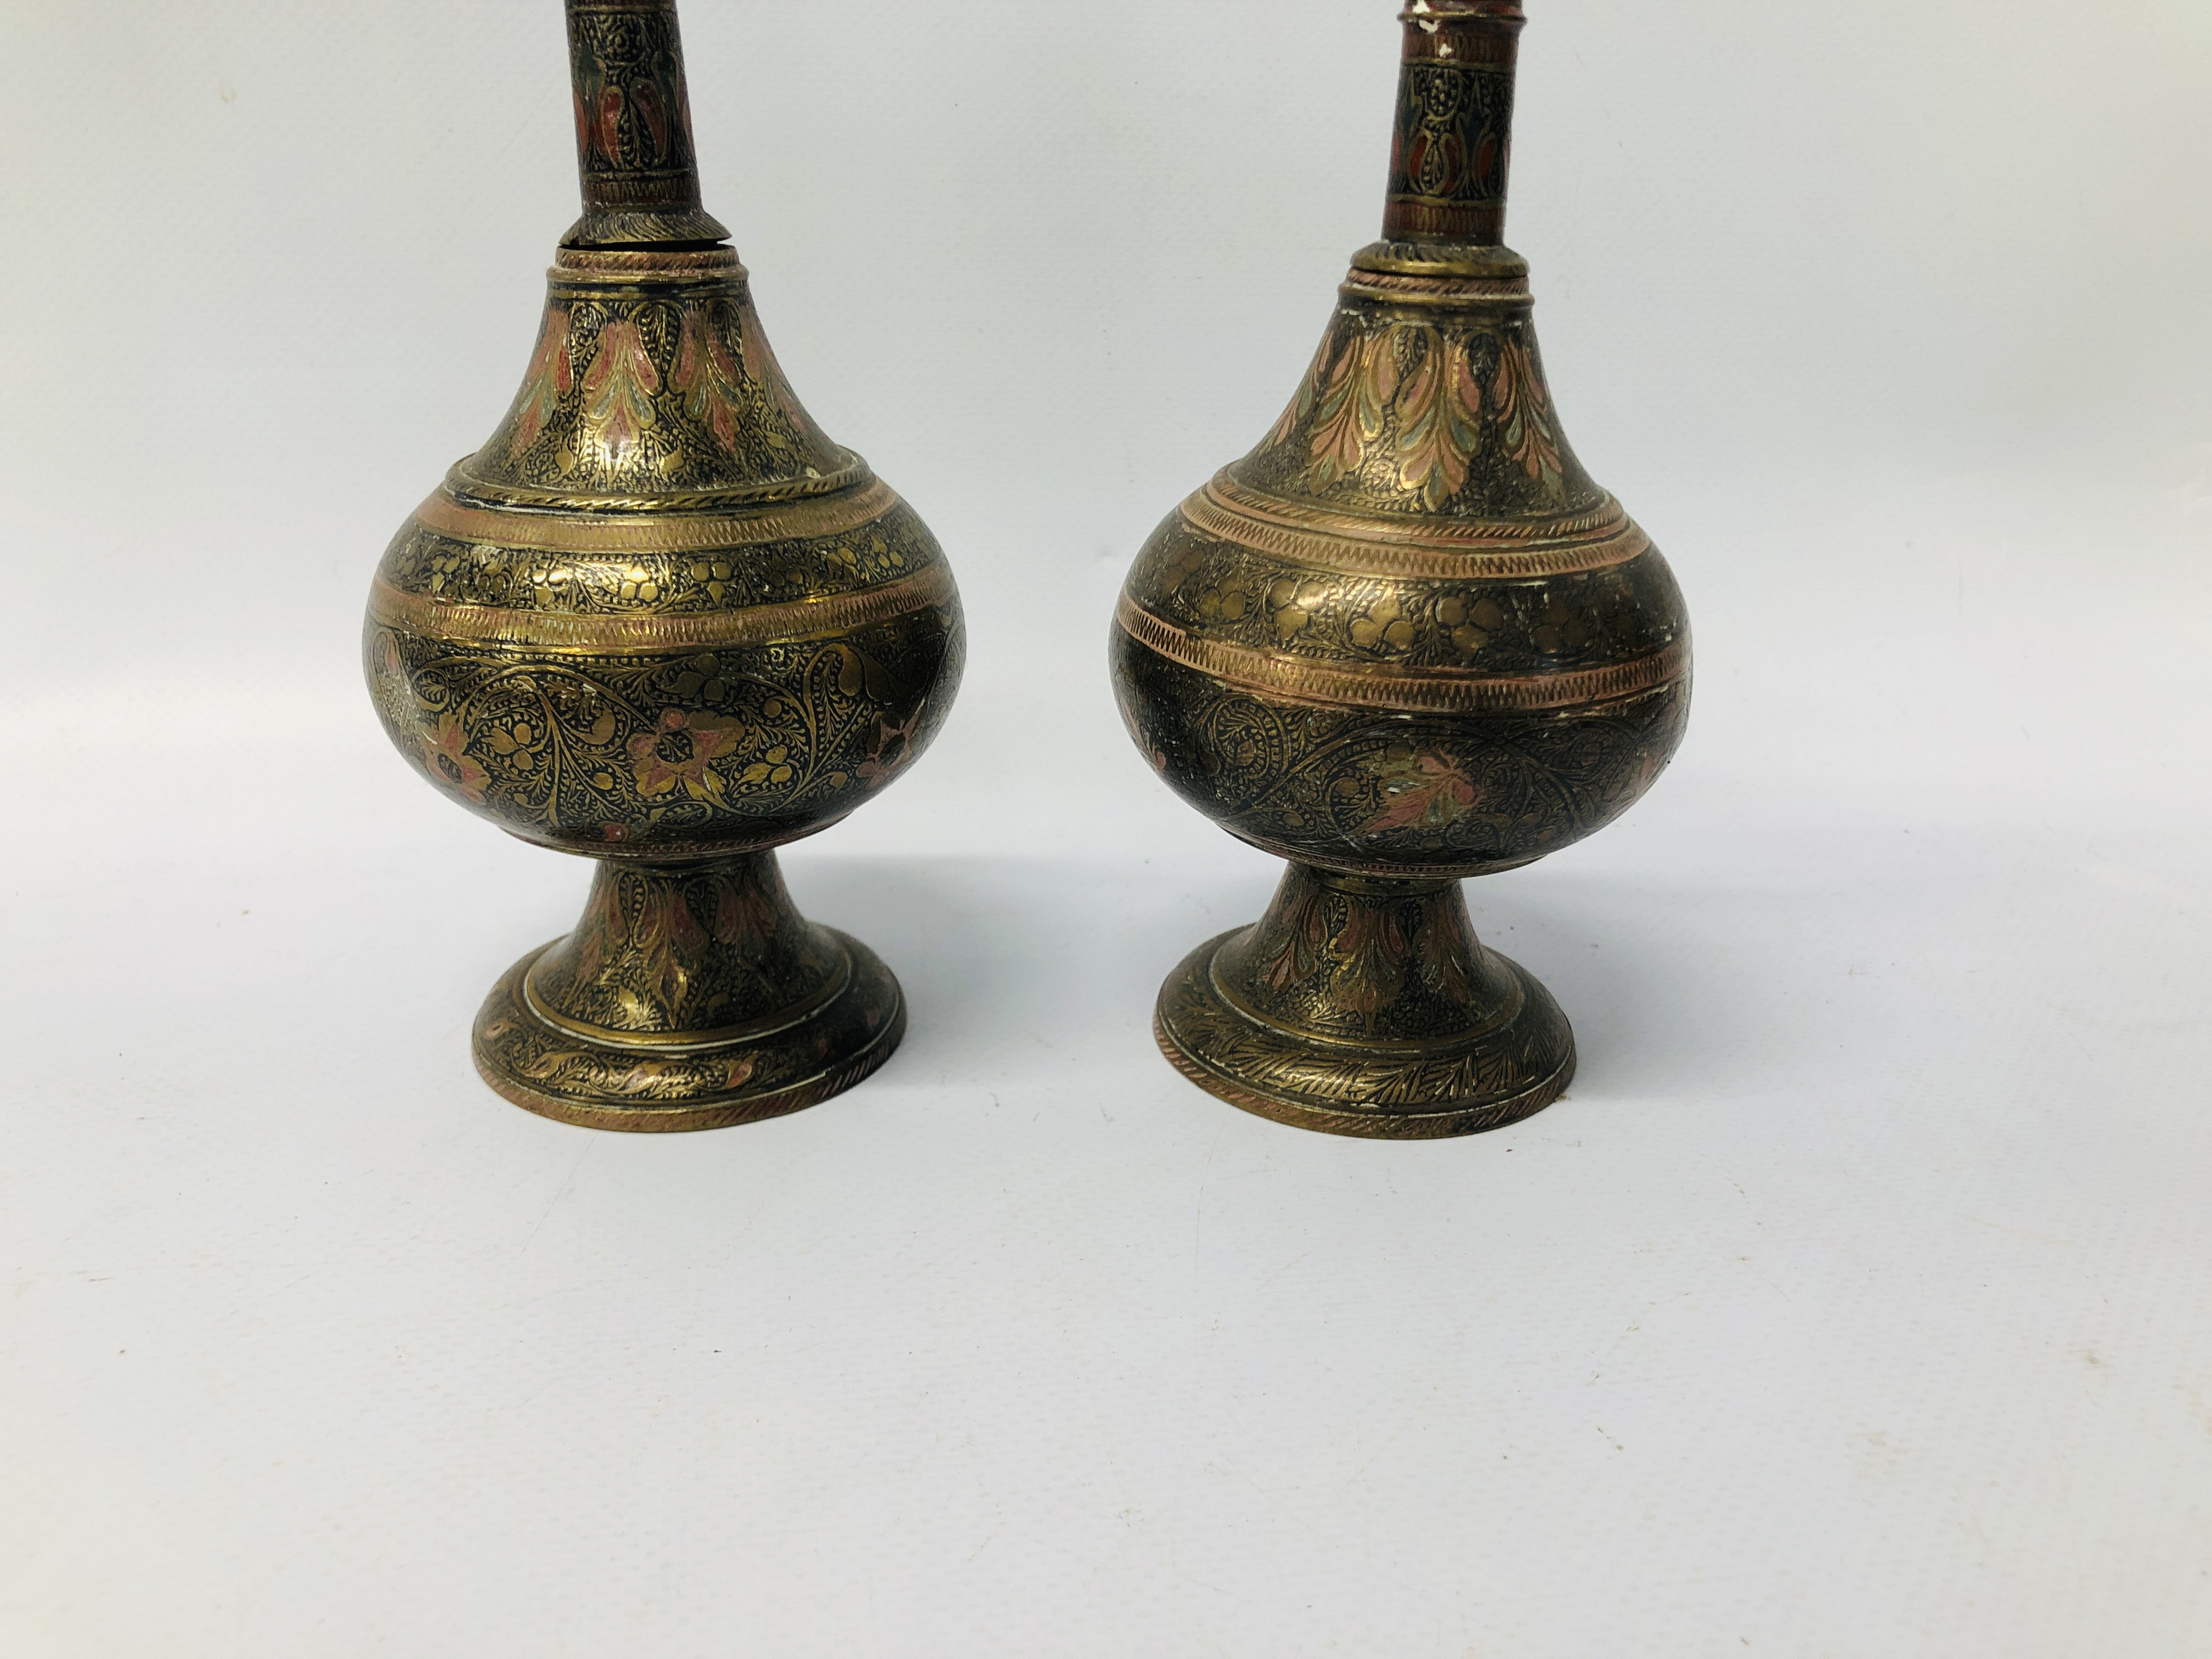 MIXED BRASS AND COPPER TO INCLUDE OIL LAMPS, LAMPS, STOVE, TRIVET, WATERING CAN, SCALES, CUPS, - Image 25 of 27